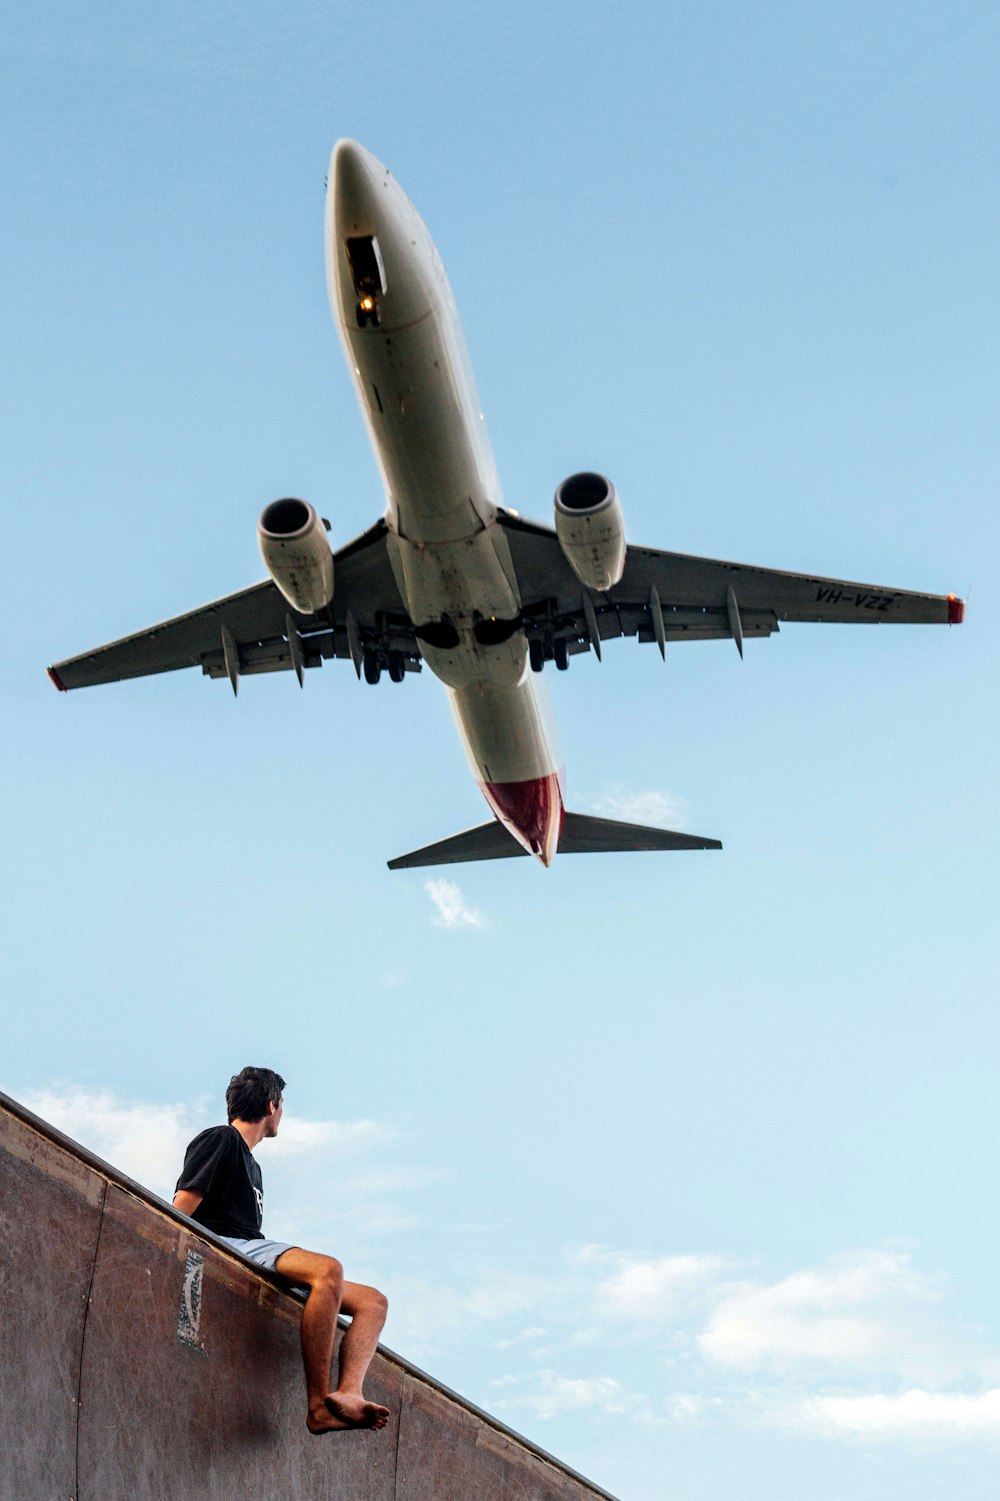 low angle photography of man wearing black shirt under white and gray airplane